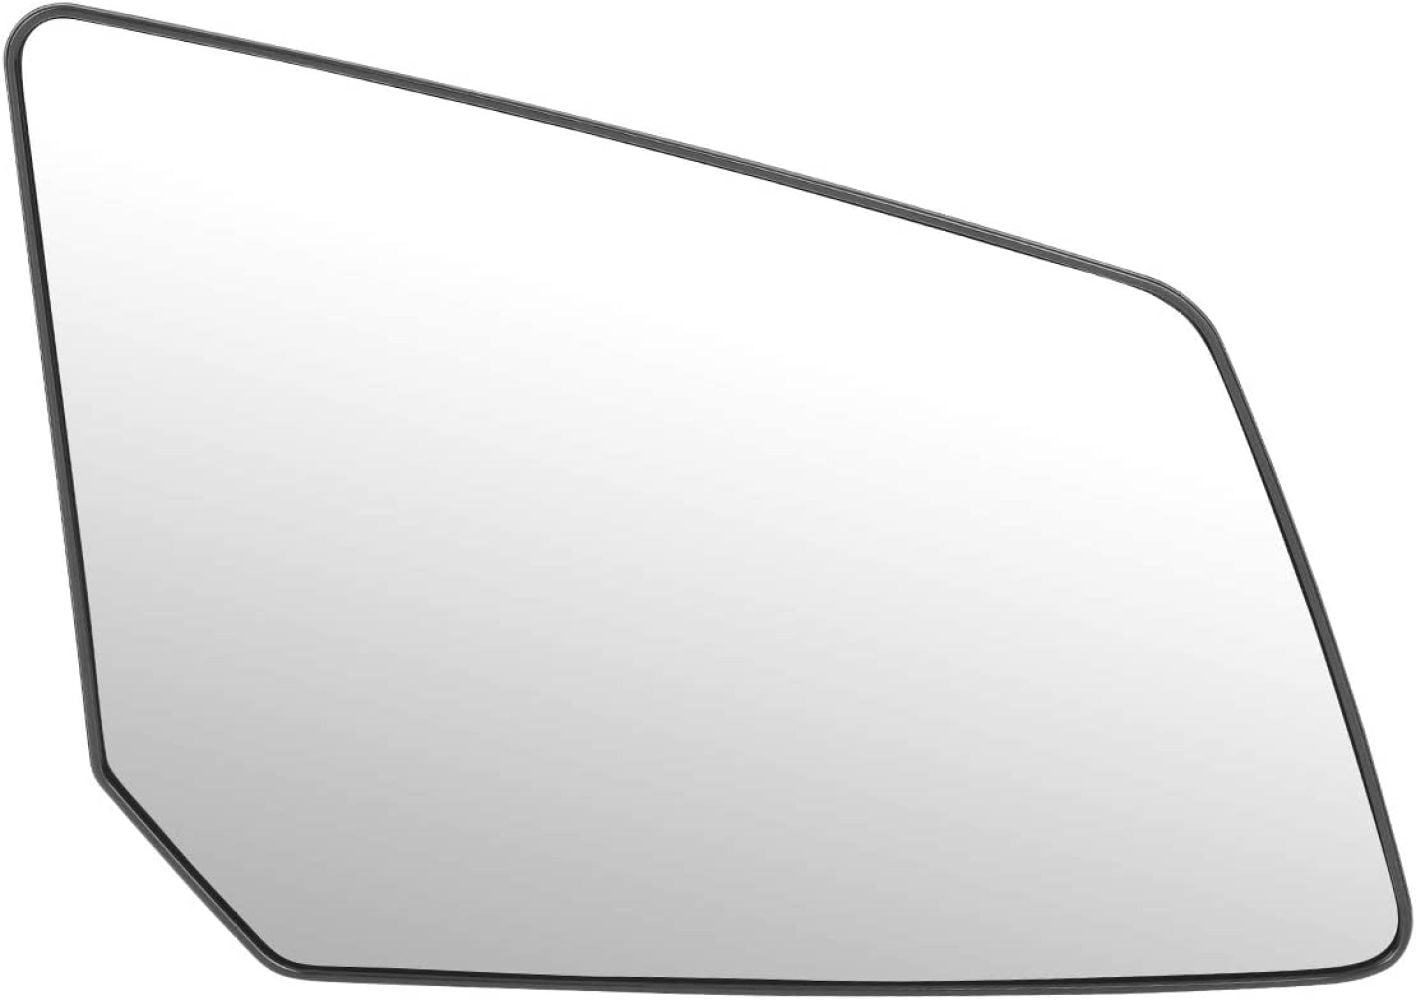 25990003 OE Style Passenger/Right Mirror Glass Lens for GMC Acadia Chevy Traverse Saturn Outlook 07-17 